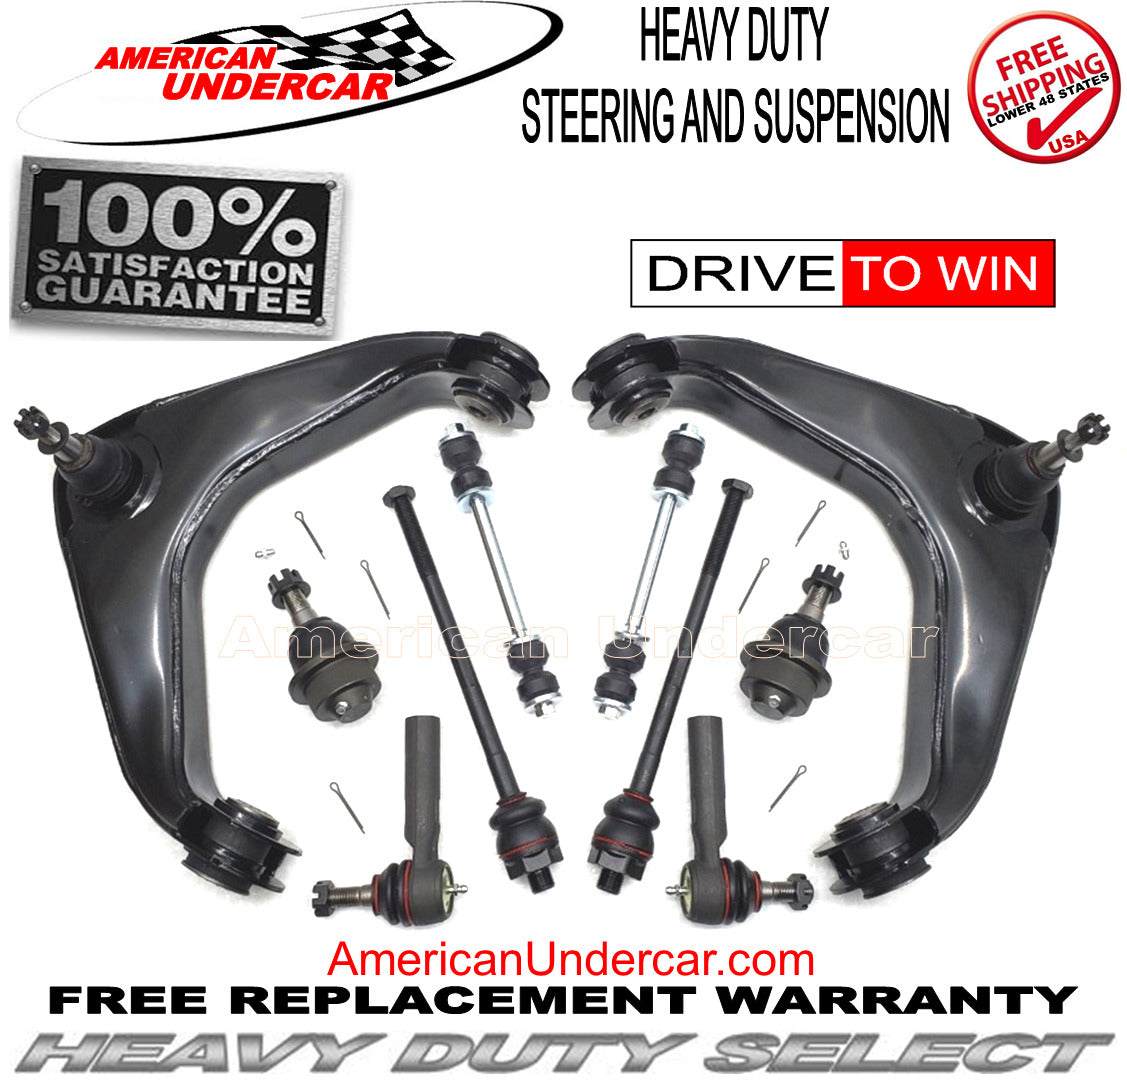 Heavy Duty Steering and Suspension Kit for 2001-2010 GMC Sierra 2500HD 2WD